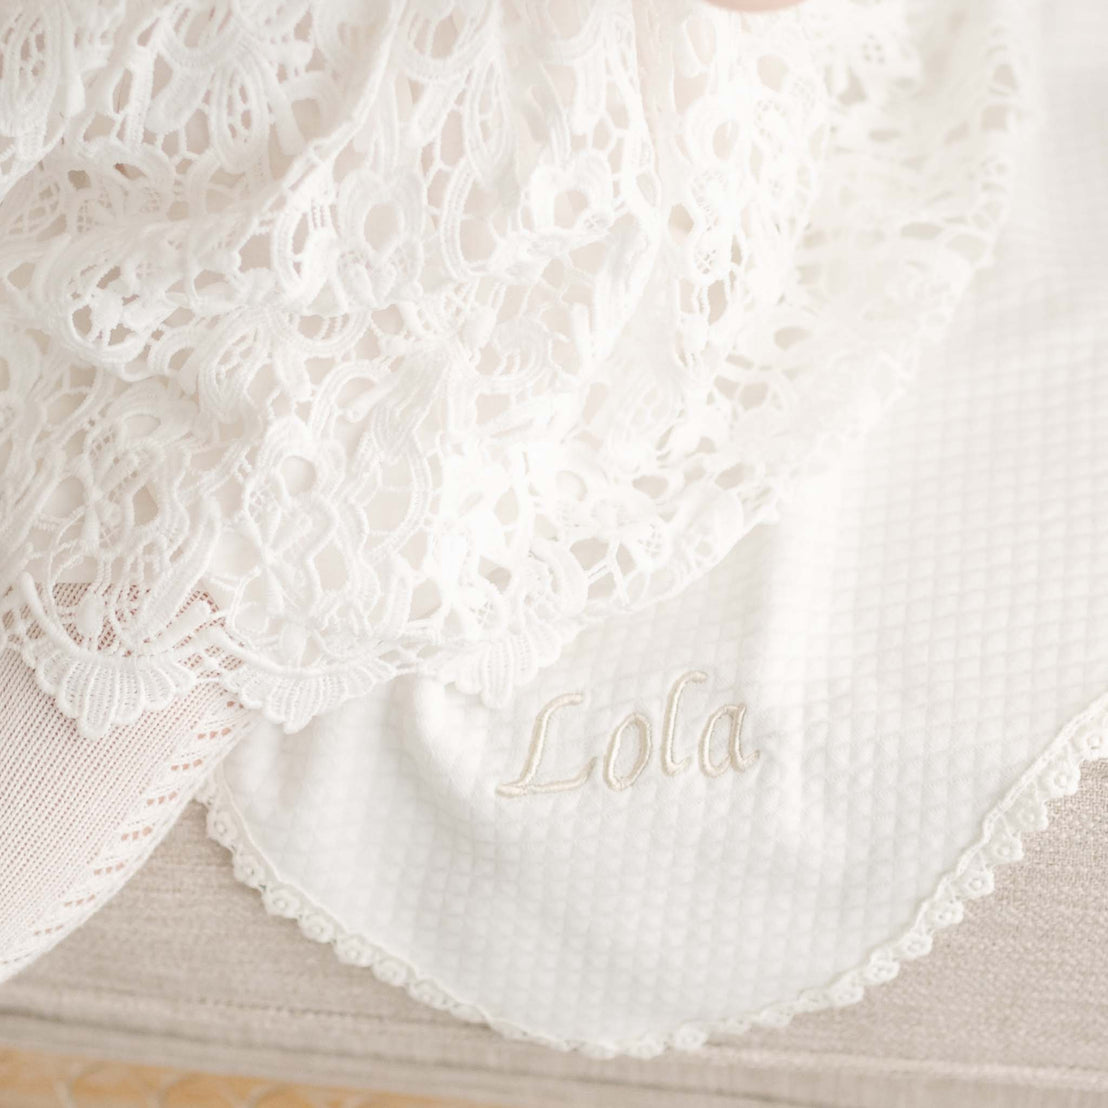 Detail of the Lola Personalized Blanket, featuring the name "Lola" embroidered on the corner.